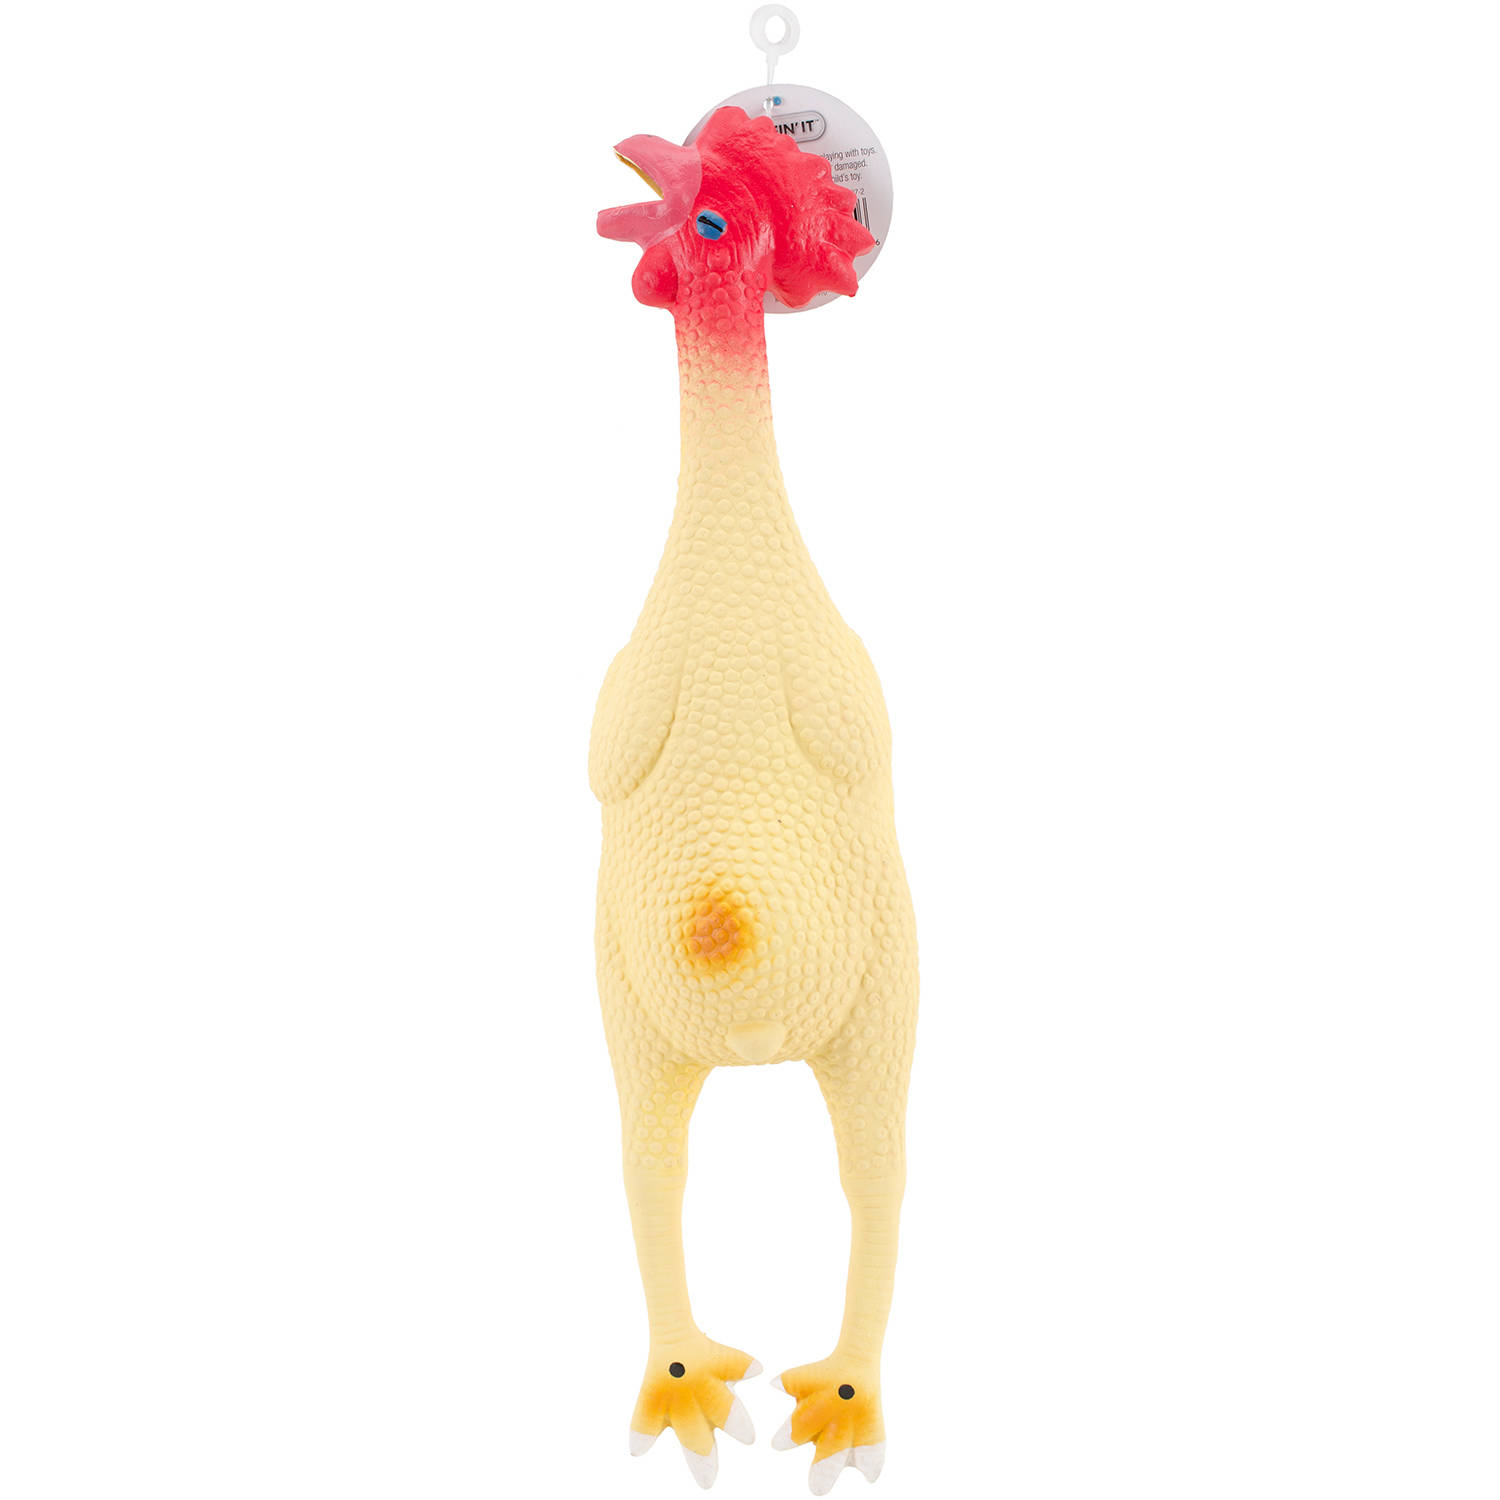 Large Rubber Chicken Dog Toy, 17